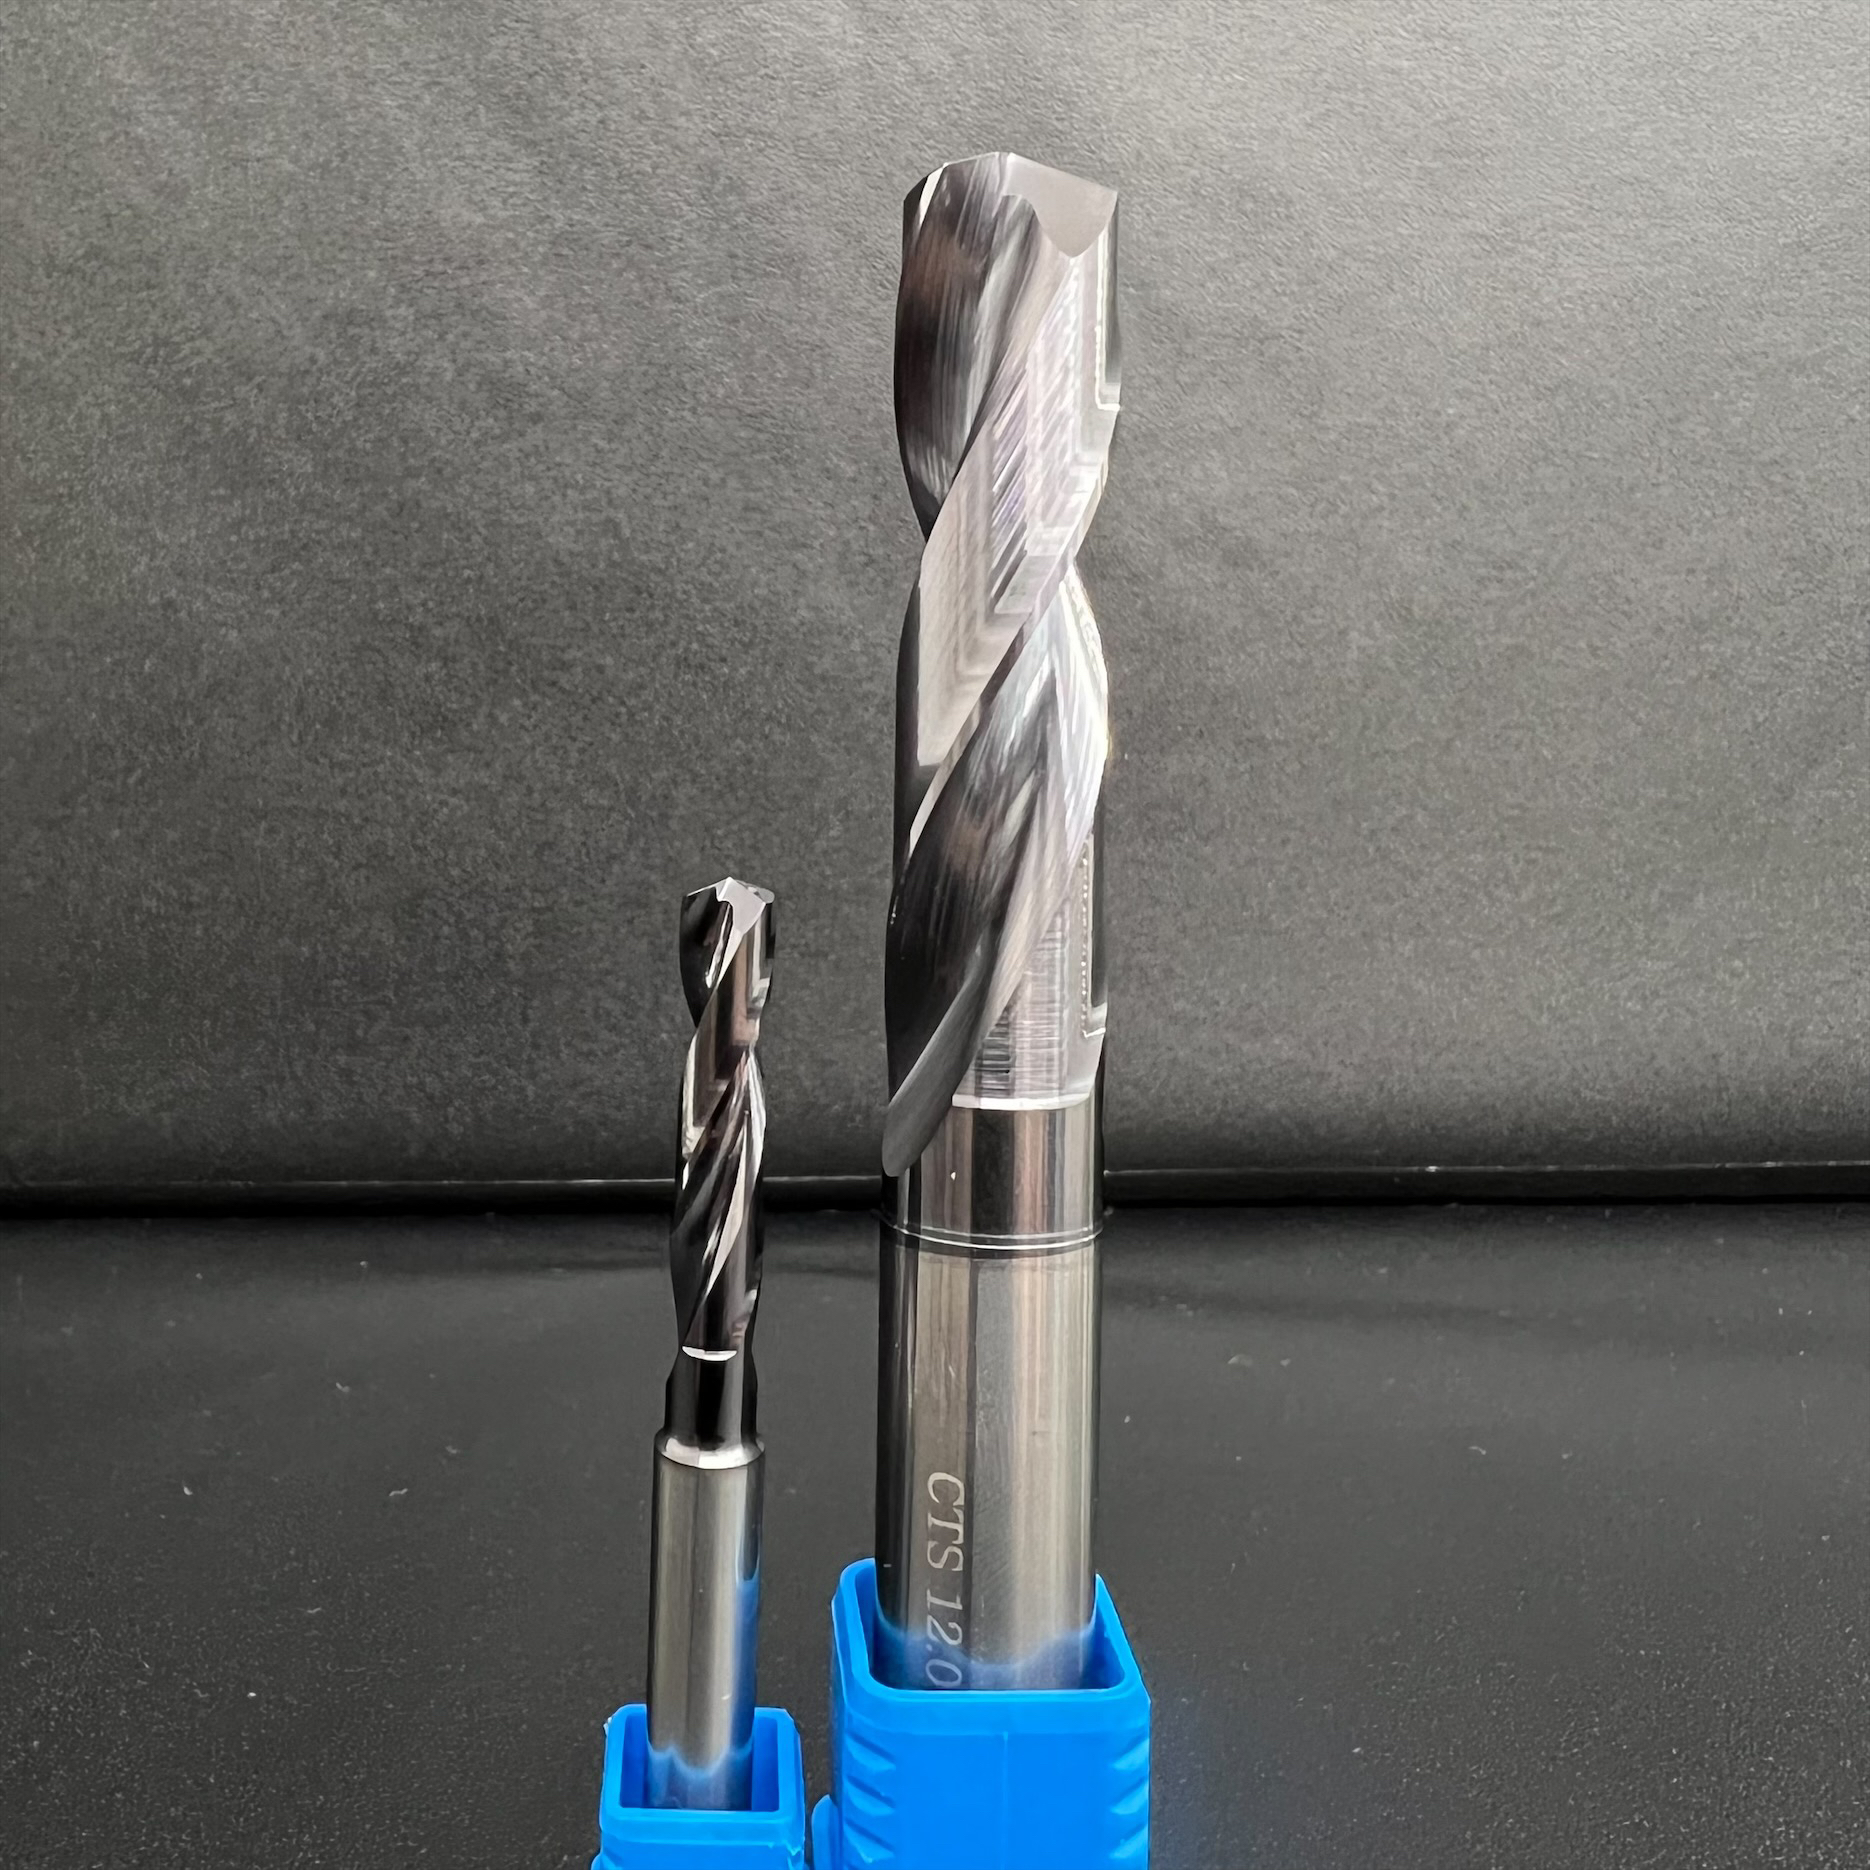 CTS3D 超硬3Dタイプオイル穴有り2枚刃ドリル【刀】 2 Flutes Tungsten Carbide Drill 3D Type with Oil Hole